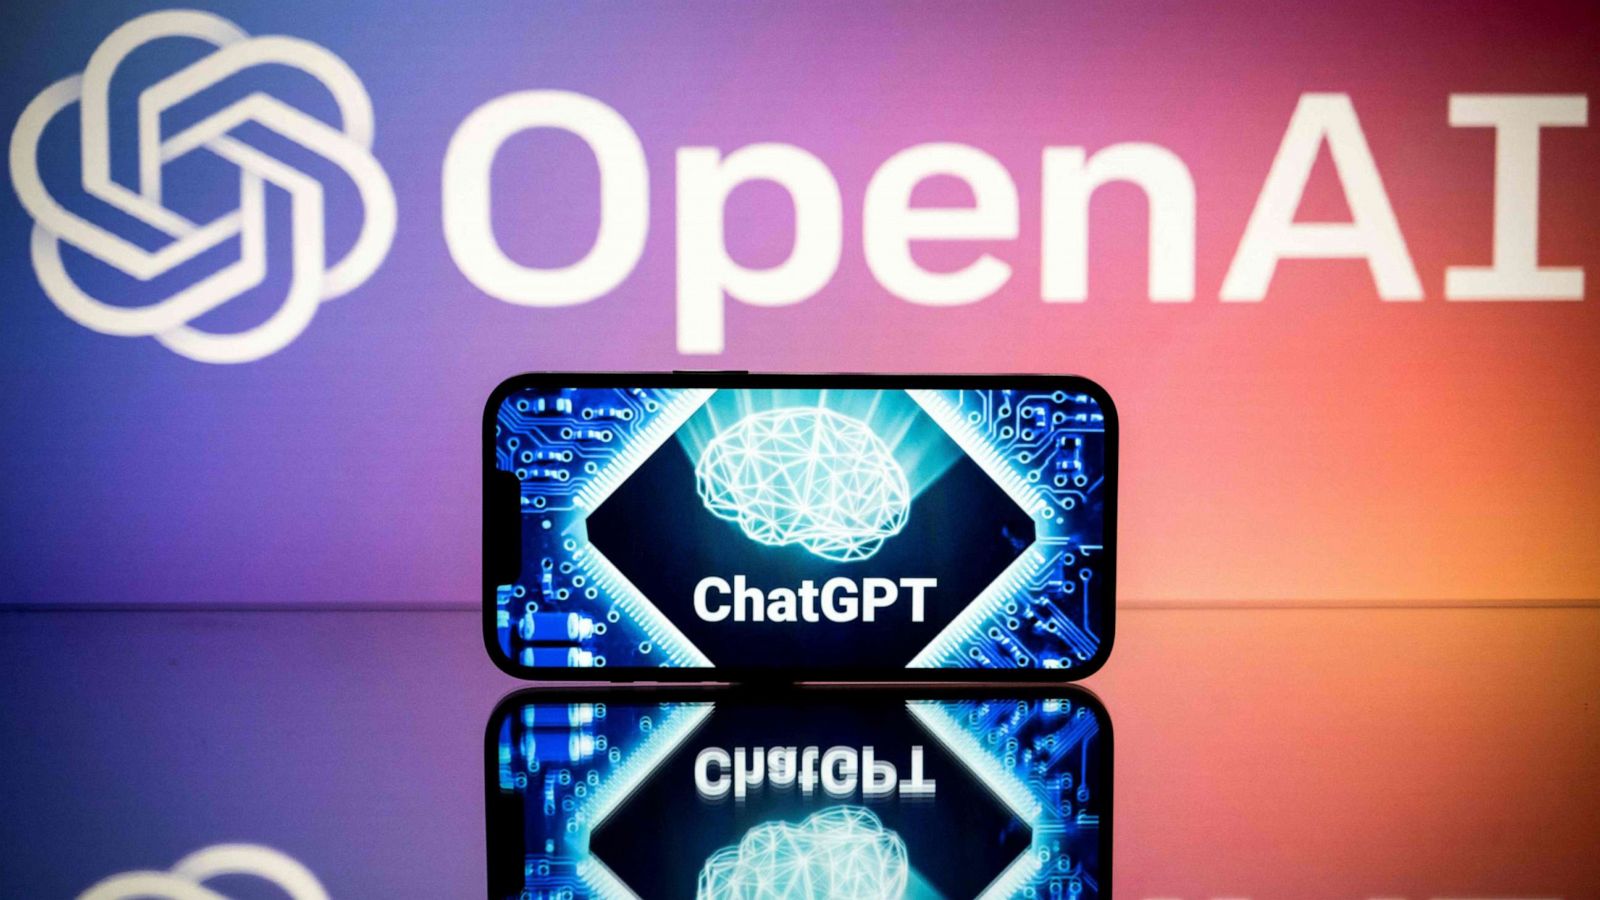 ChatGPT Gets Major Upgrade to Smarter, More Conversational AI with GPT-4 Turbo